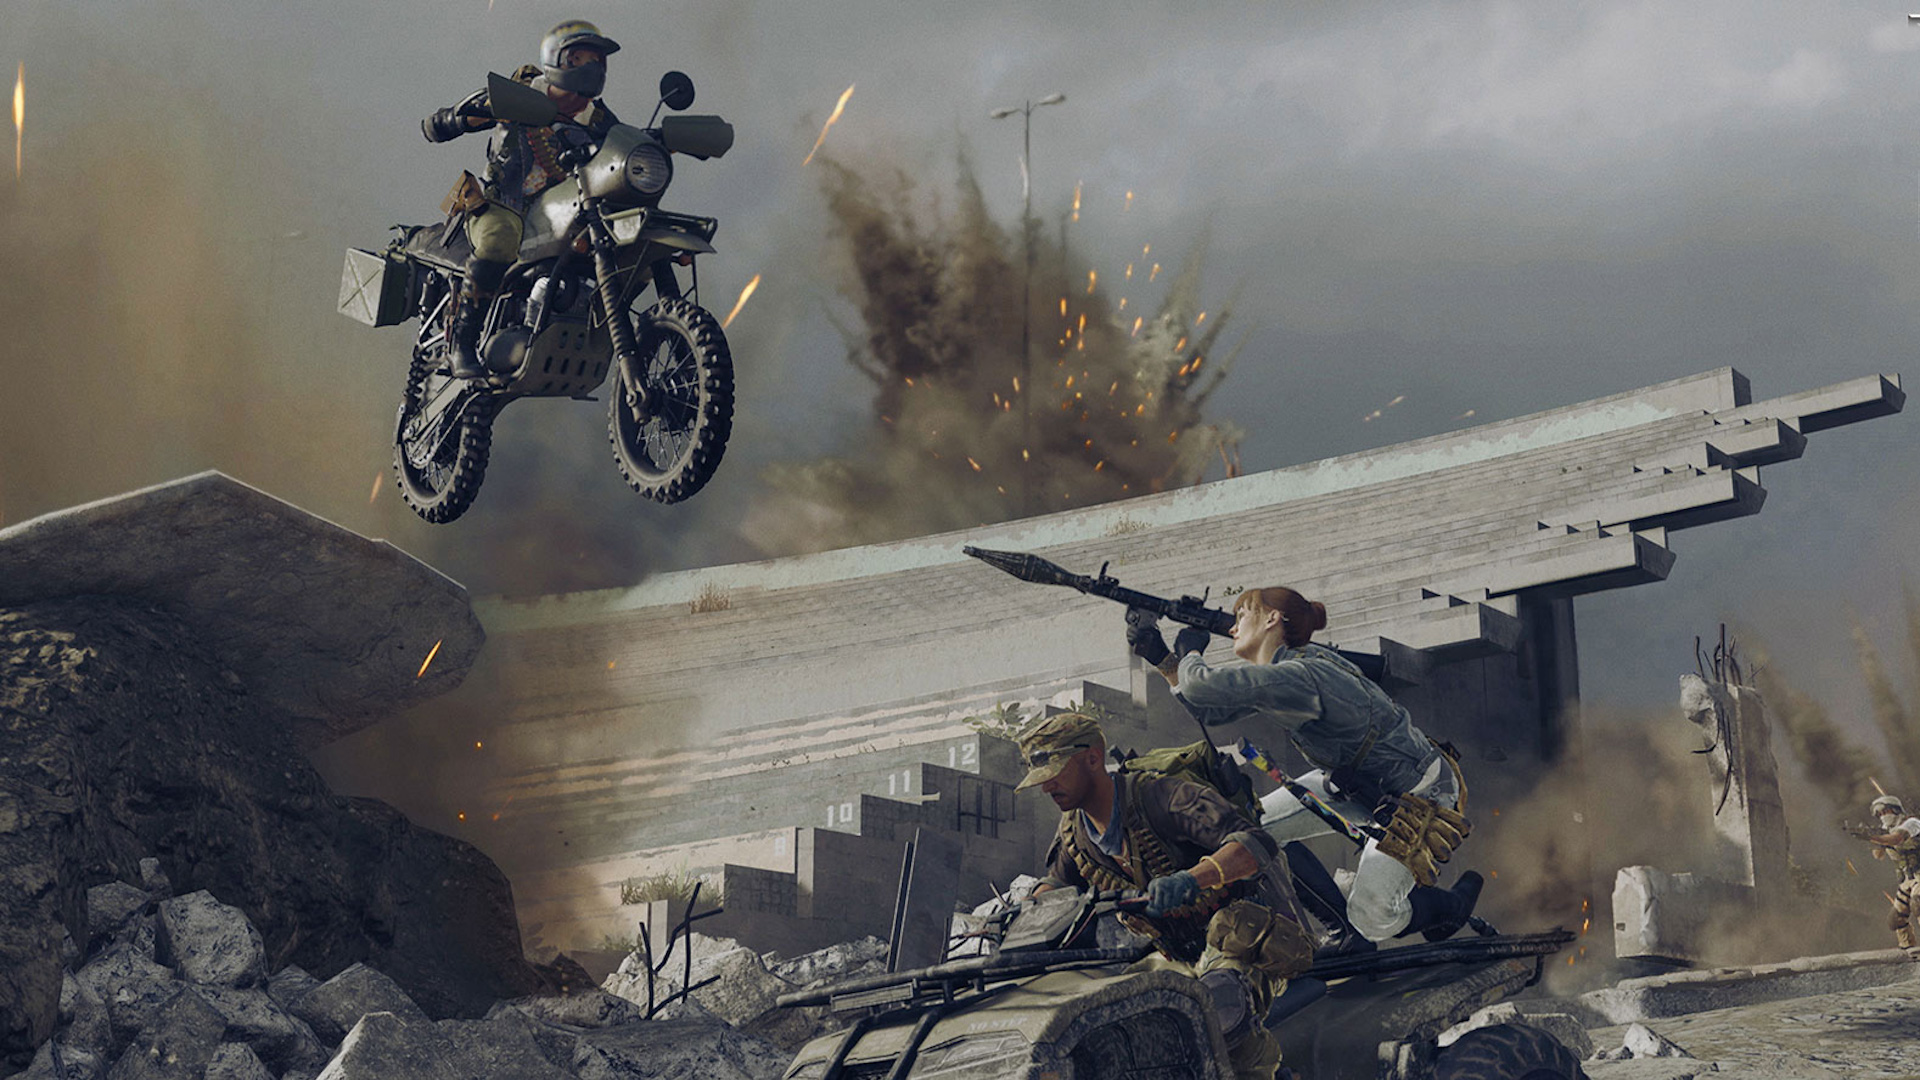 Warzone Iron Trials: A player on the back of a quad bike aims a rocket launcher at another player riding a bike.